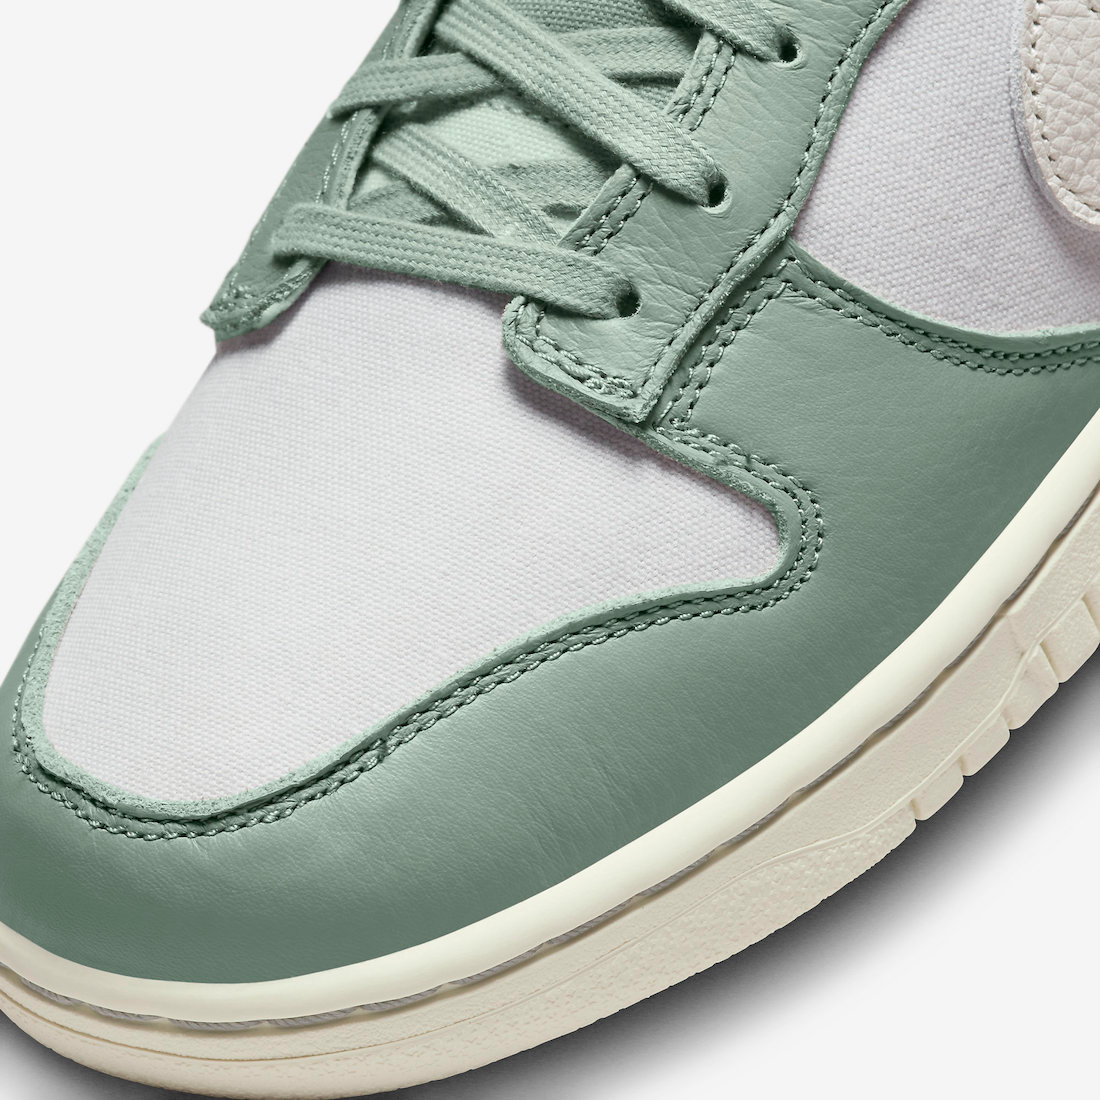 Nike-Dunk-Low-Mica-Green-Release-Date-7